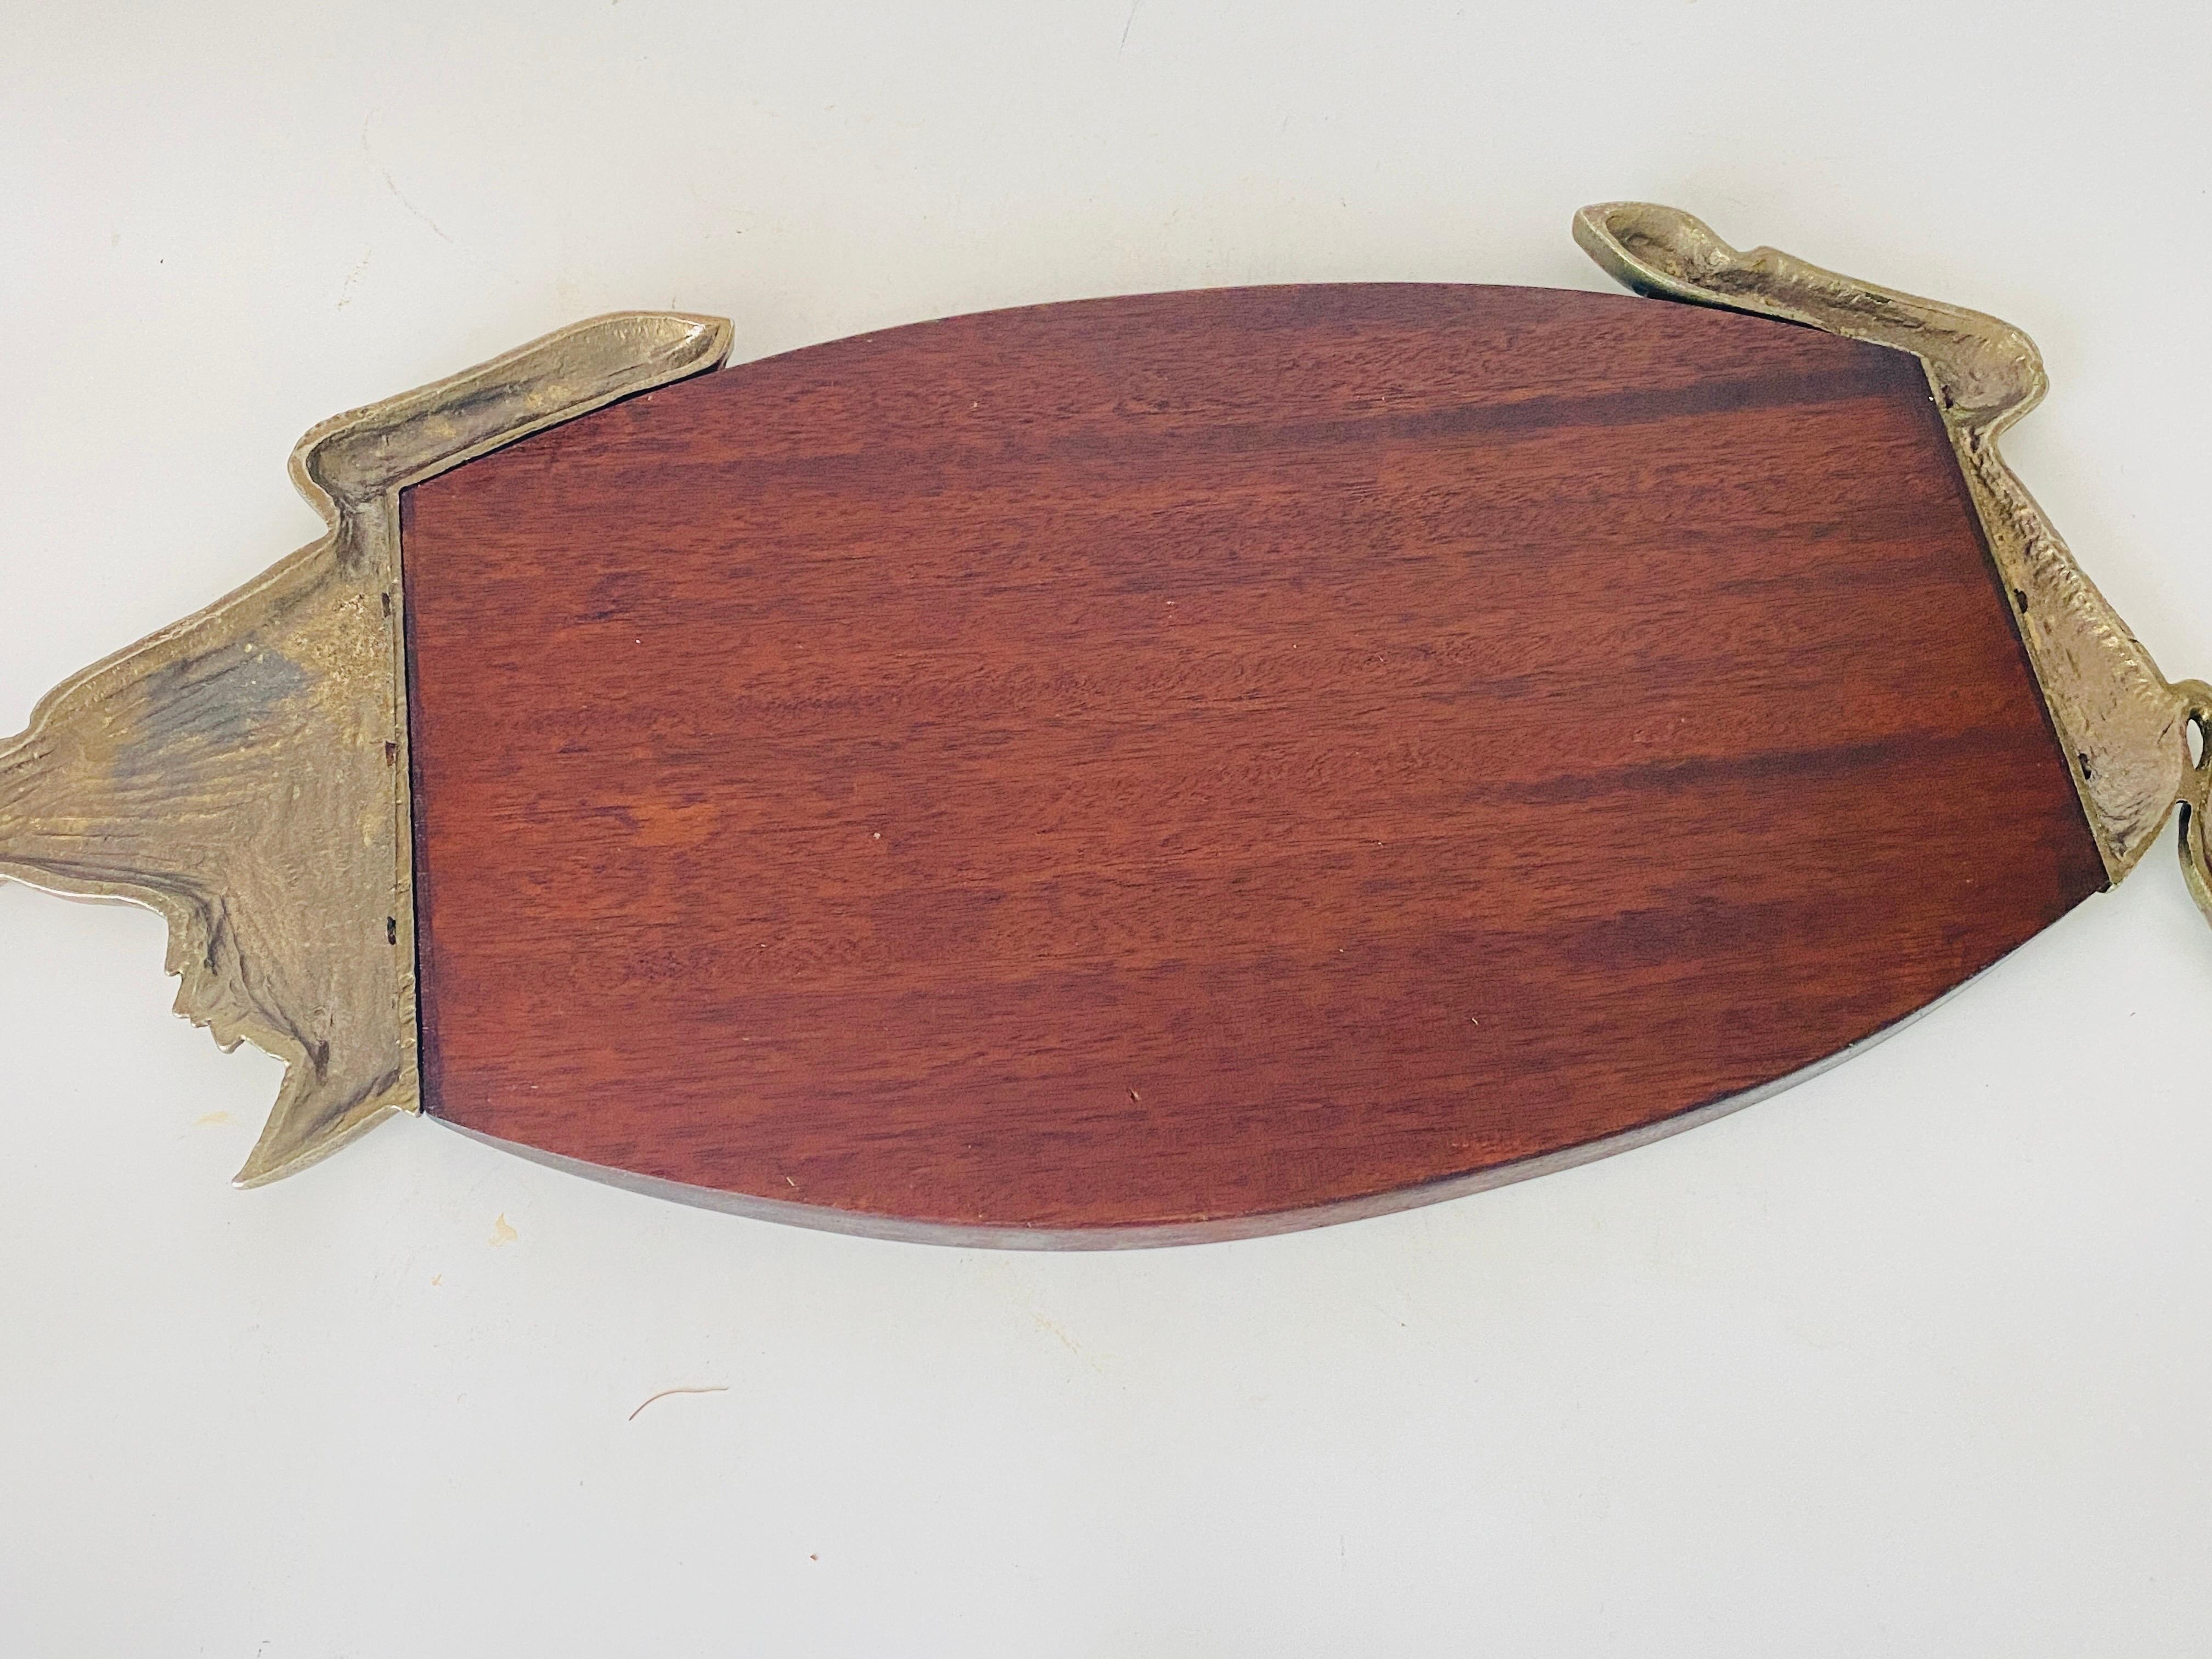 Patinated Wooden and Metal Chopping or Cutting Board  Brown Color, French, 20th Century For Sale